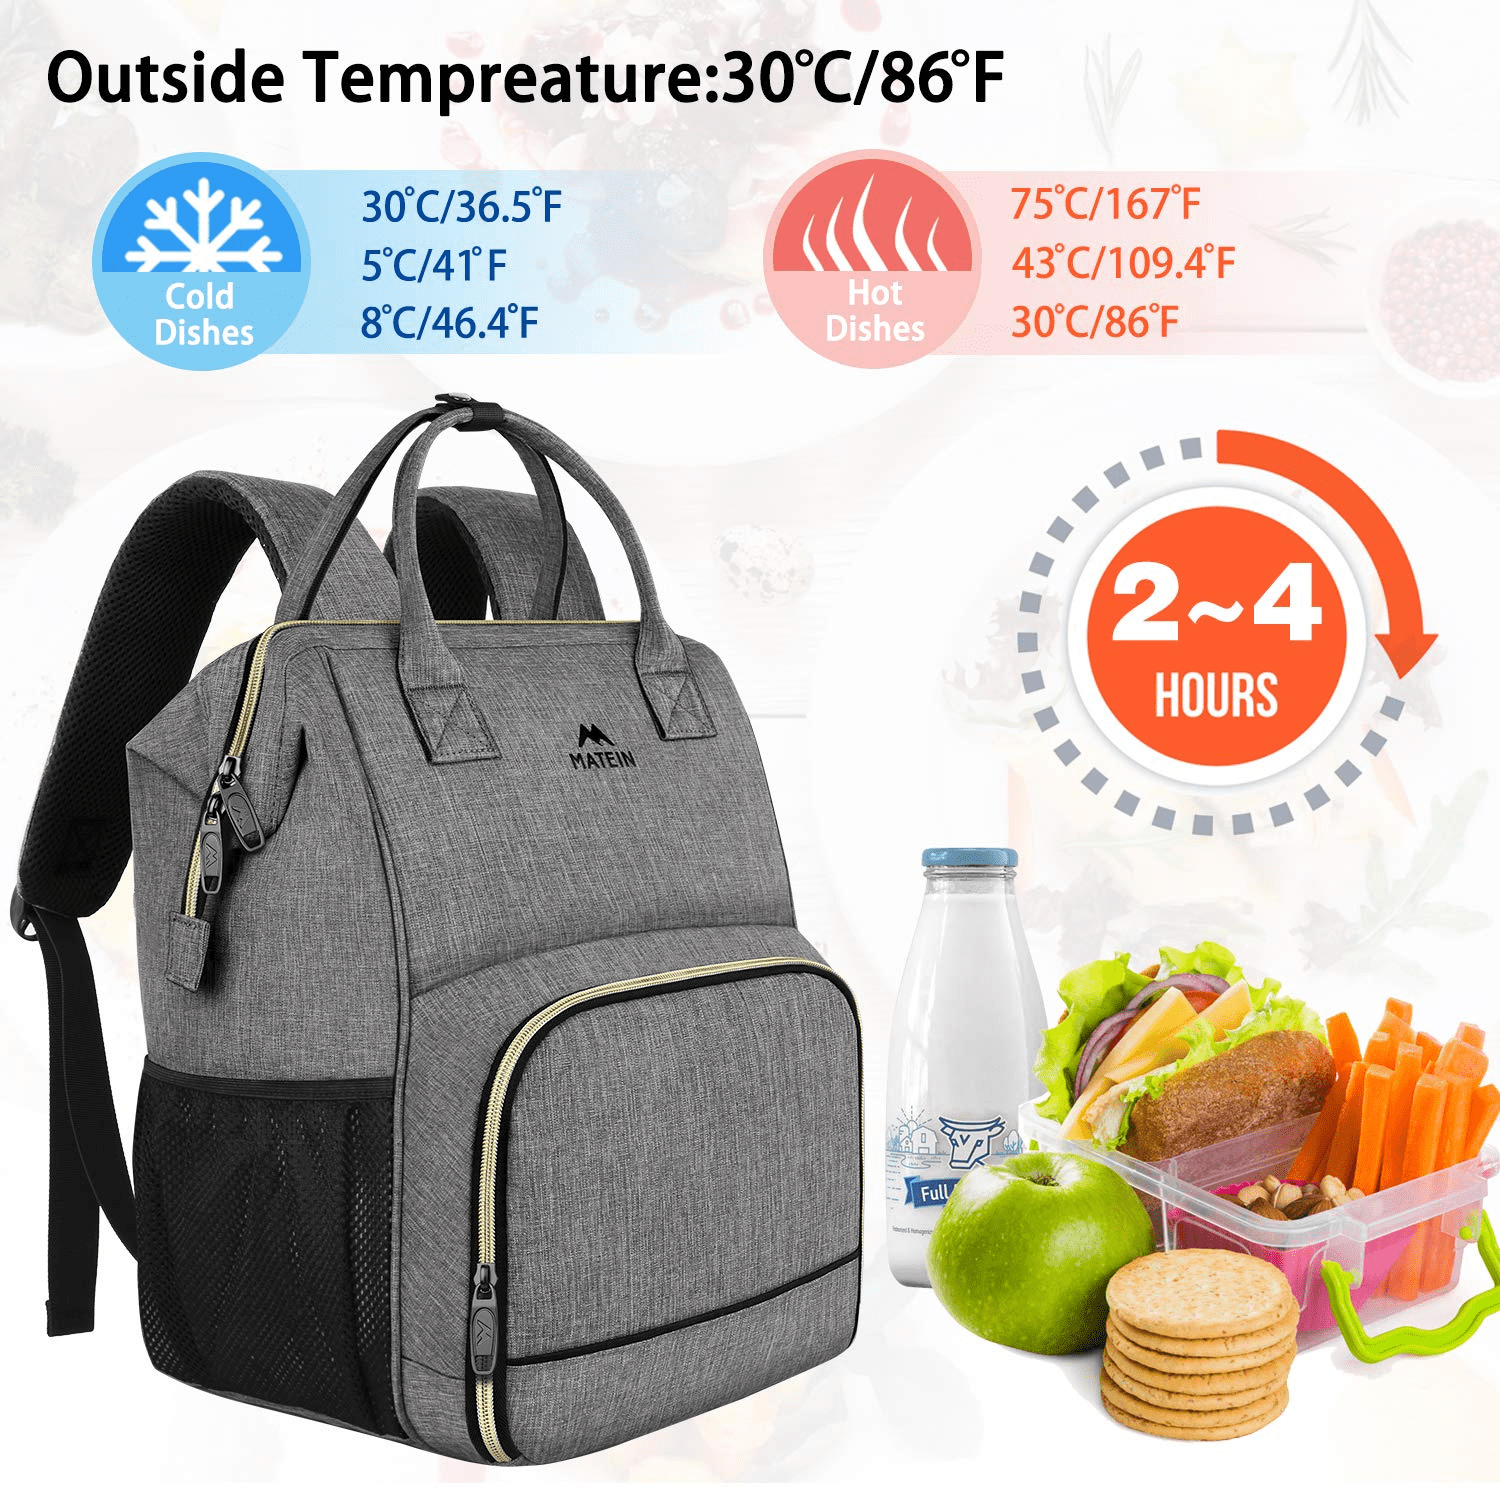 Lunch Backpack for Women Insulated Cooler Lunch Box Laptop Backpacks Leakproof Water Resistant College School Bookbag for Women Girls Daily Work Travel fit 15.6 Inch Laptop Black 